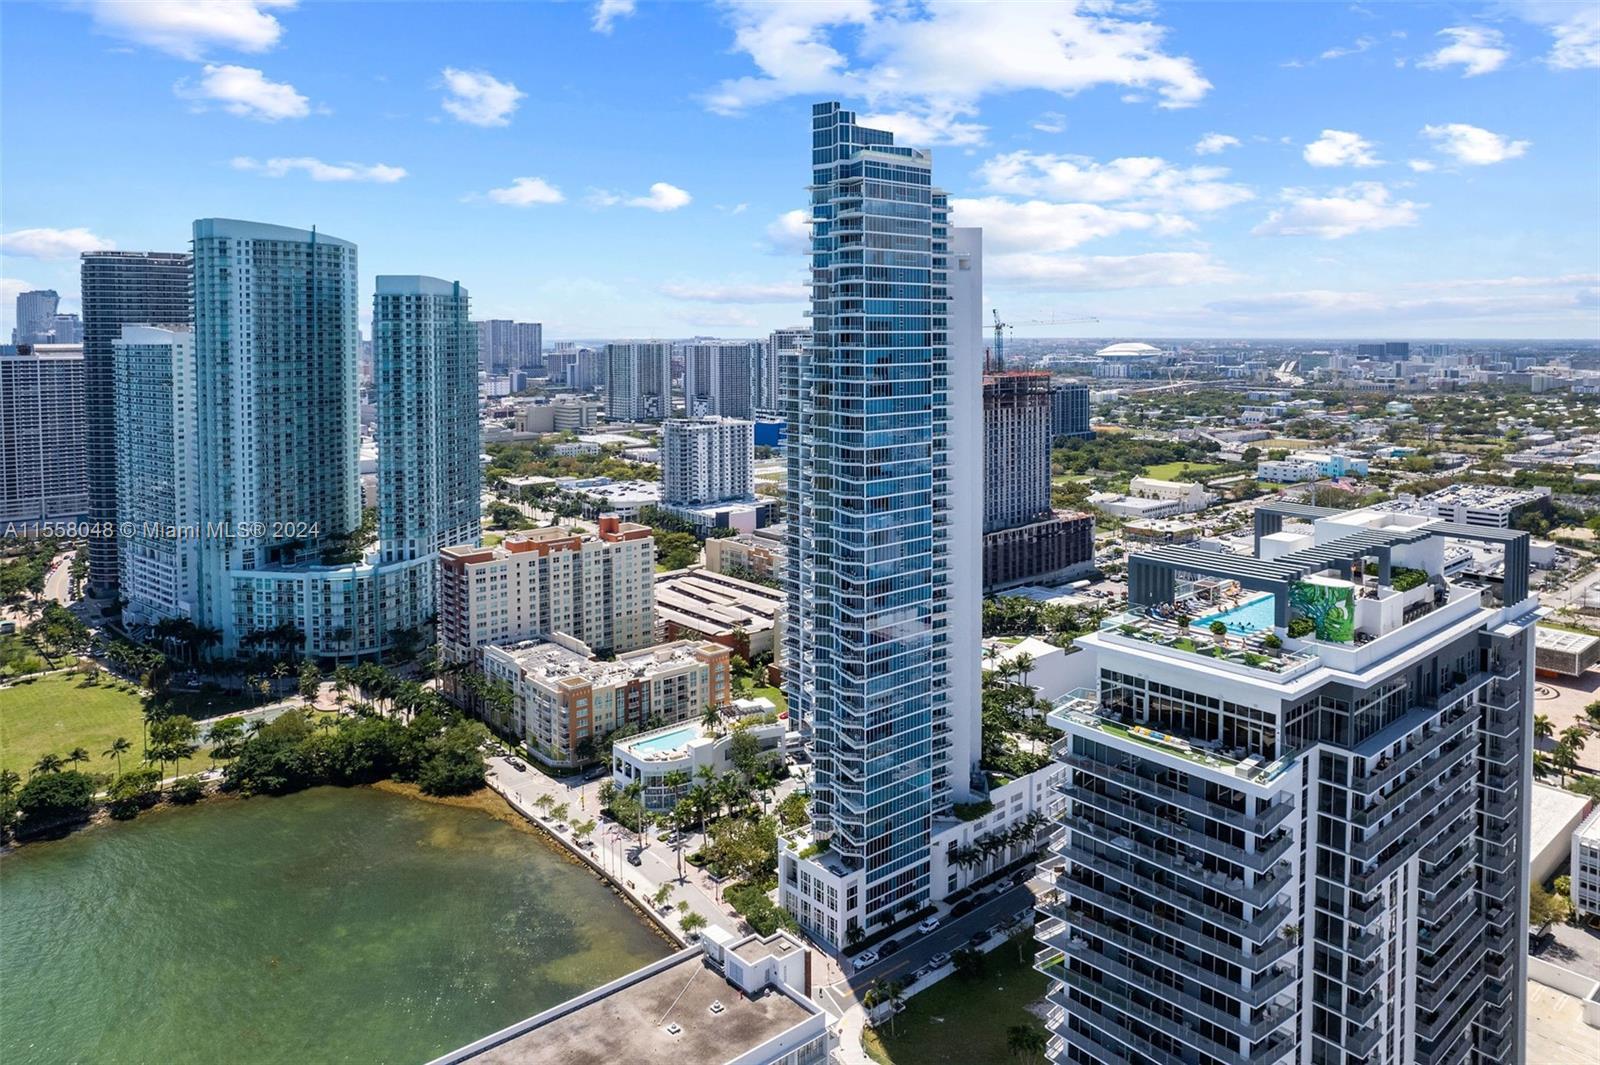 *Receive two weeks free move in 05/19. AVAILABLE 04/20. The Watermarc at Biscayne Bay - Brand New Lu